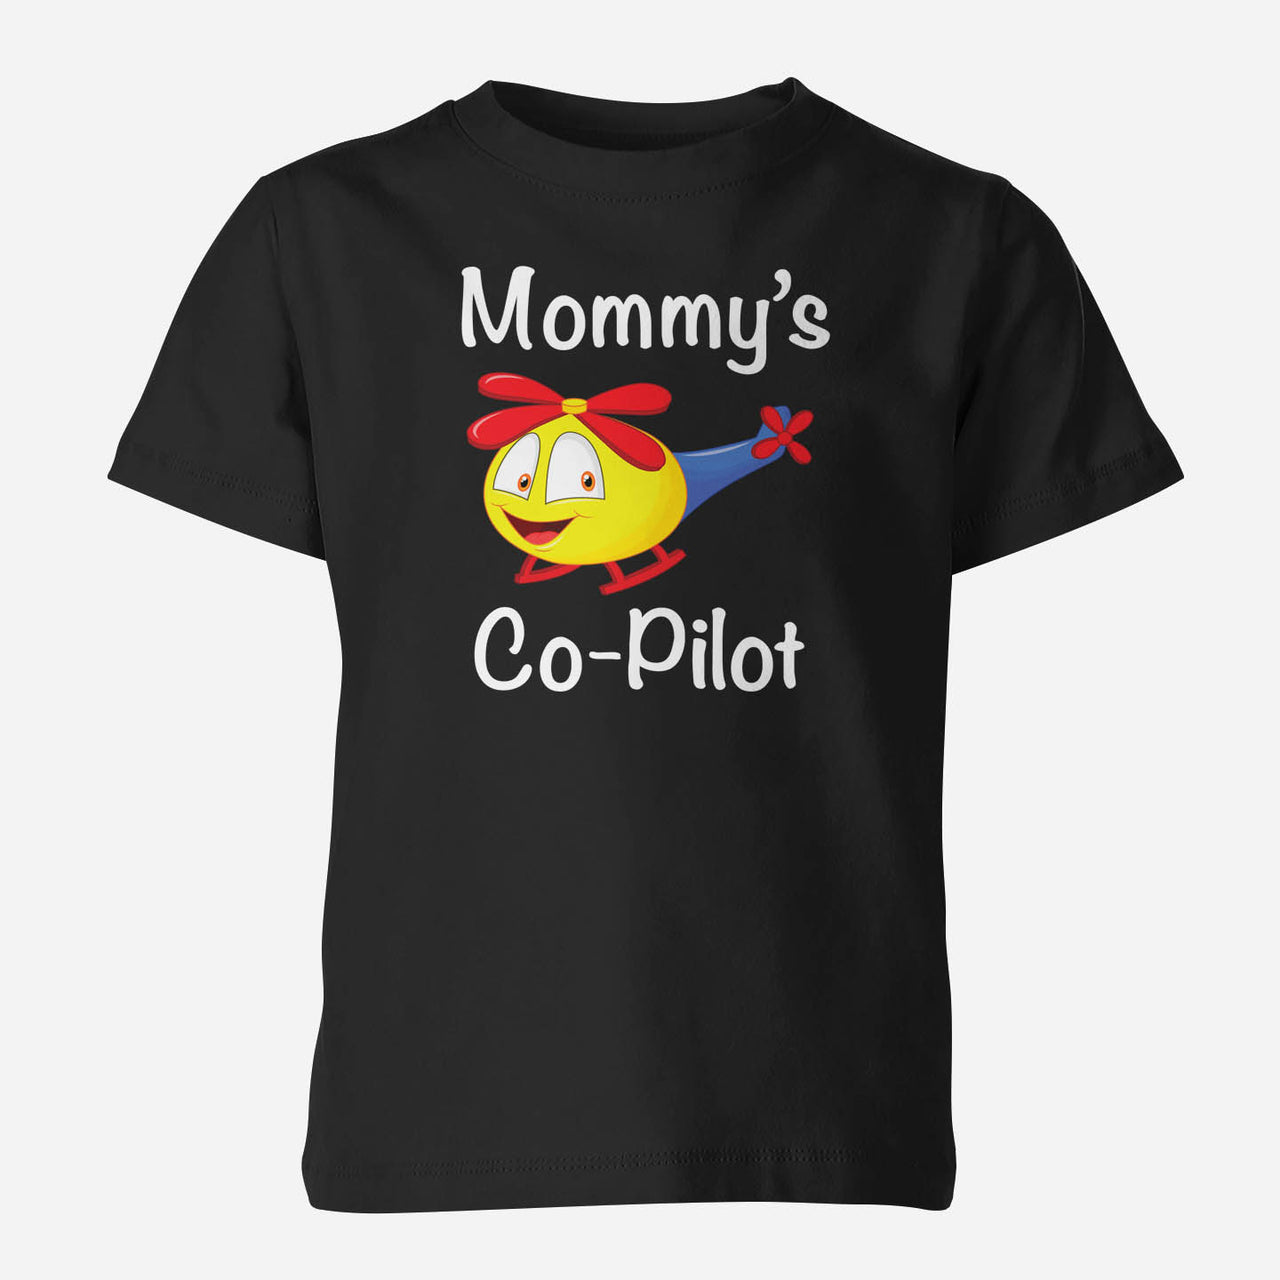 Mommy's Co-Pilot (Helicopter) Designed Children T-Shirts